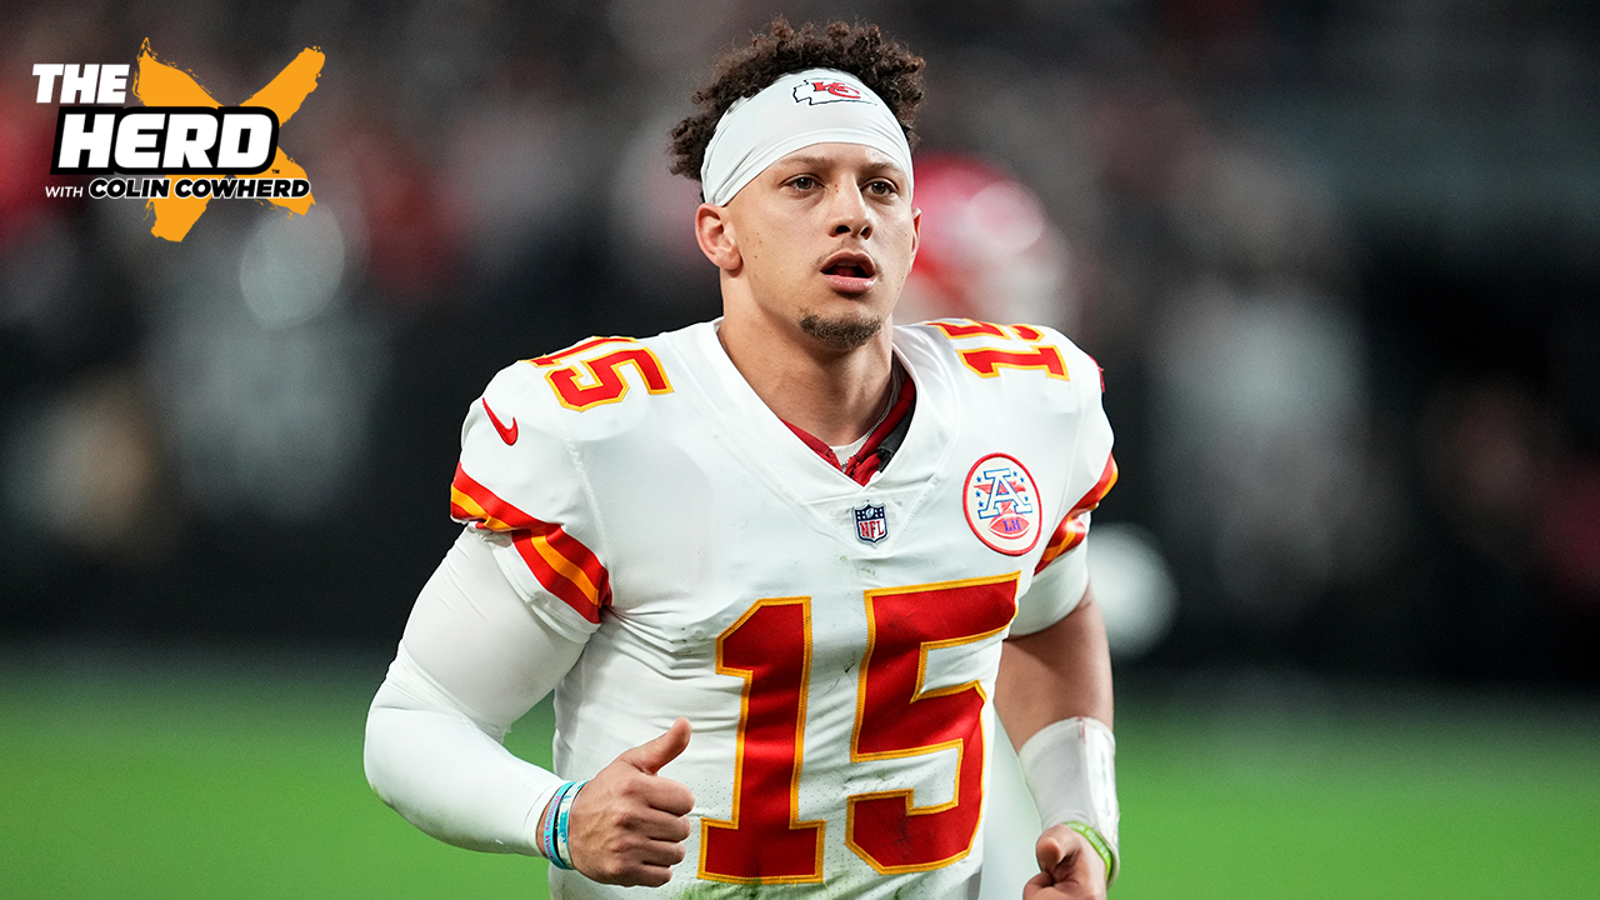 Is Mahomes the clear favorite for MVP award? 